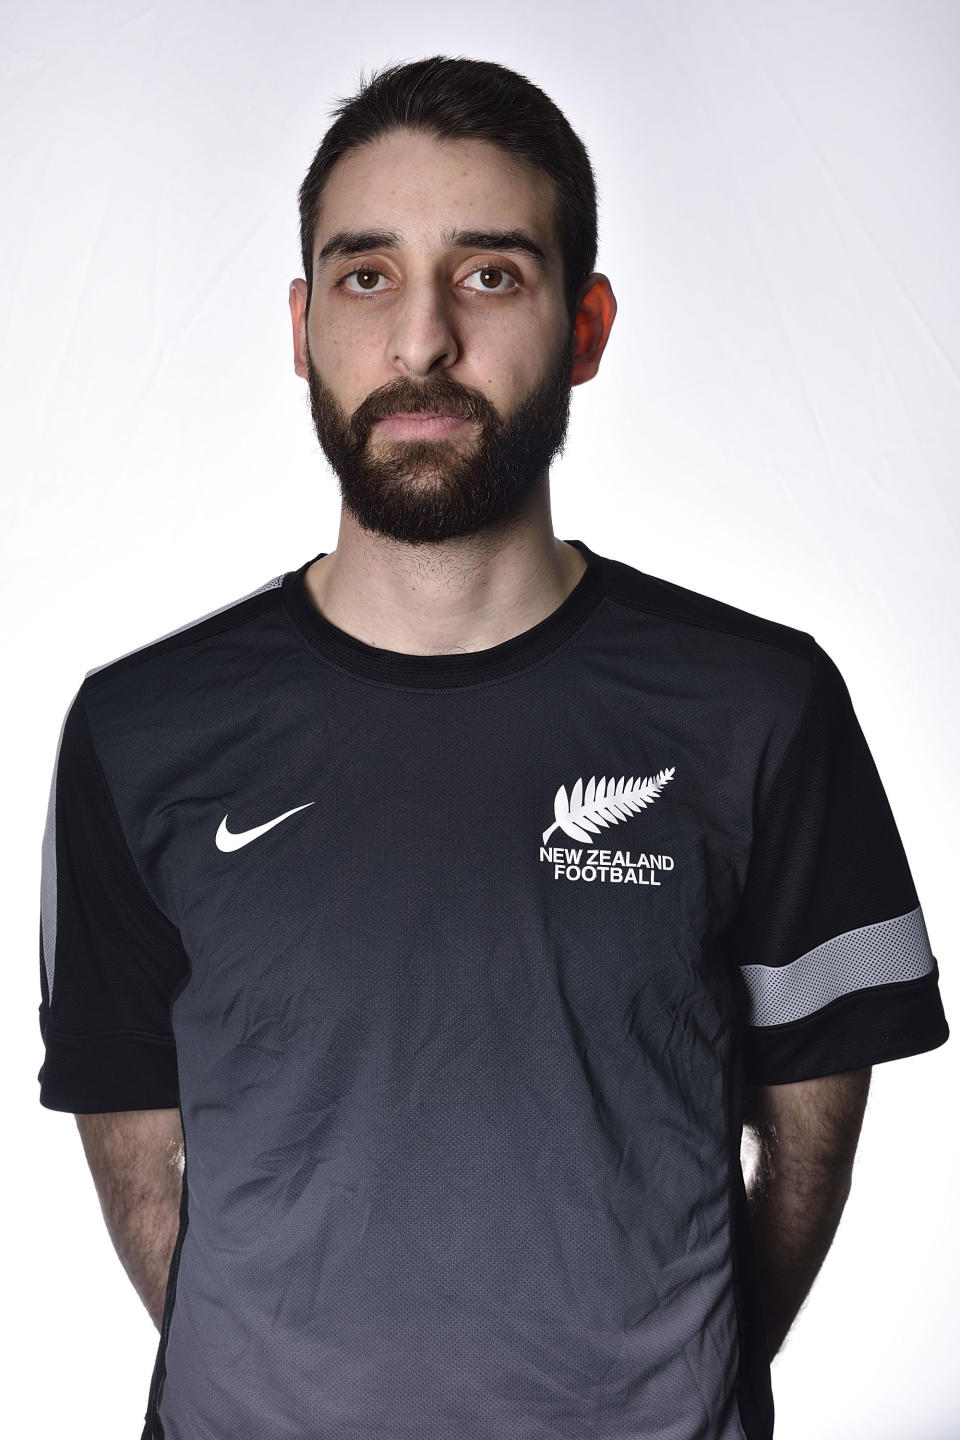 In this July 5, 2015 photo, New Zealand futsal player Atta Elayyan poses for a portrait in Wellington, New Zealand. Elyayyan was a victim in the mass shootings at the Al Noor Mosque in Christchurch on Friday, March 15, 2019. (Marty Melville/Photosport via AP)